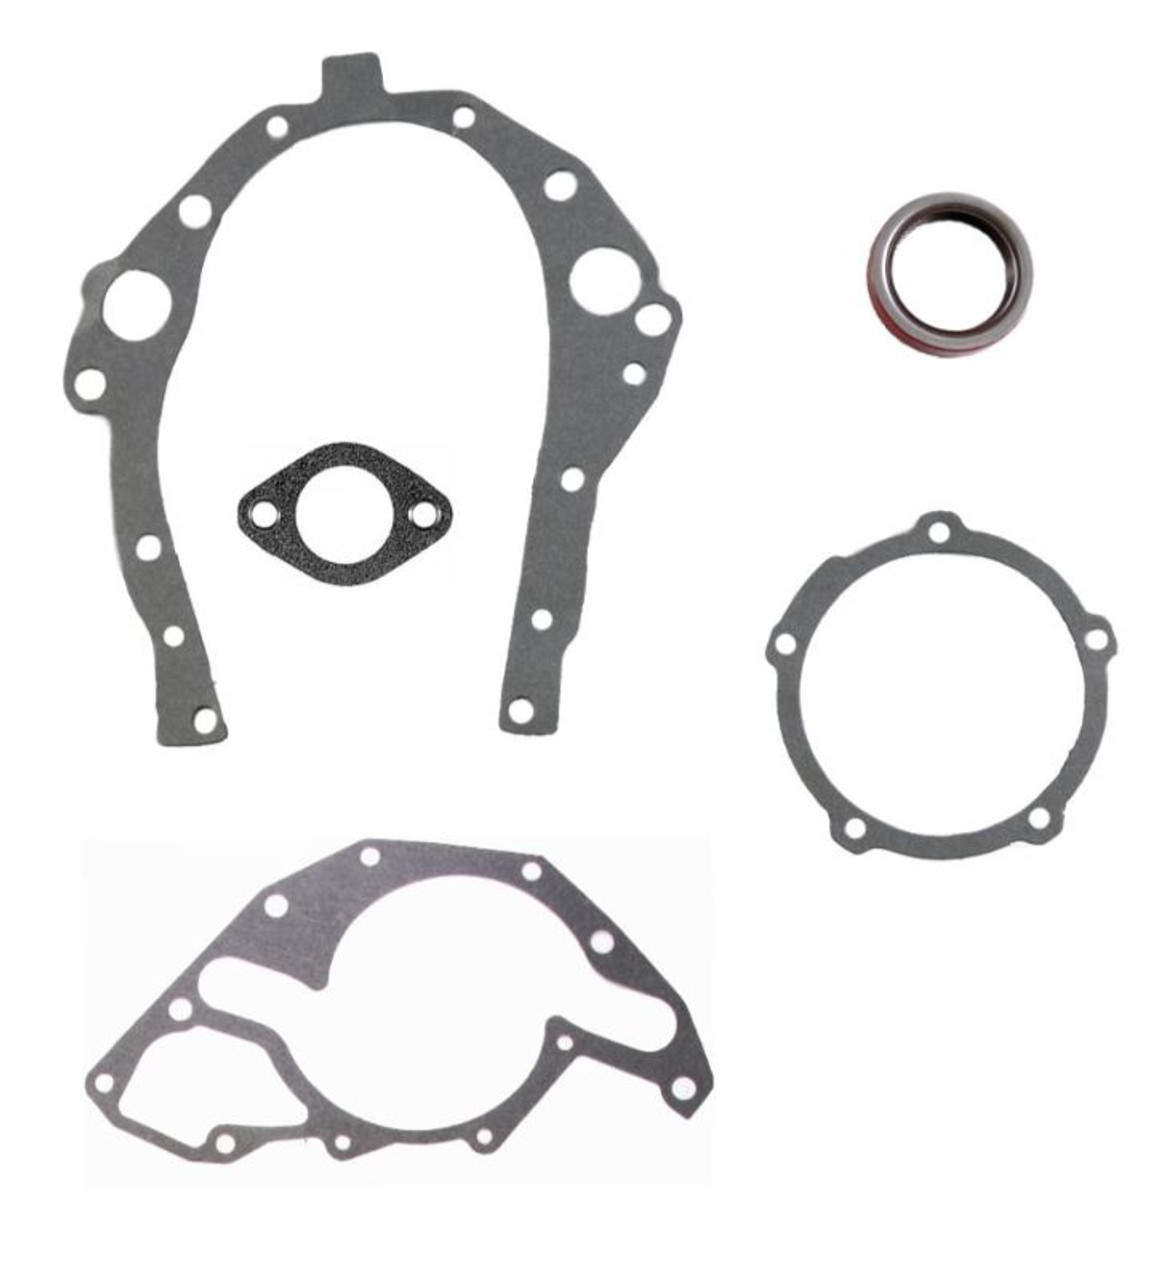 1988 Buick Century 2.8L Engine Timing Cover Gasket Set TCC189-A -15